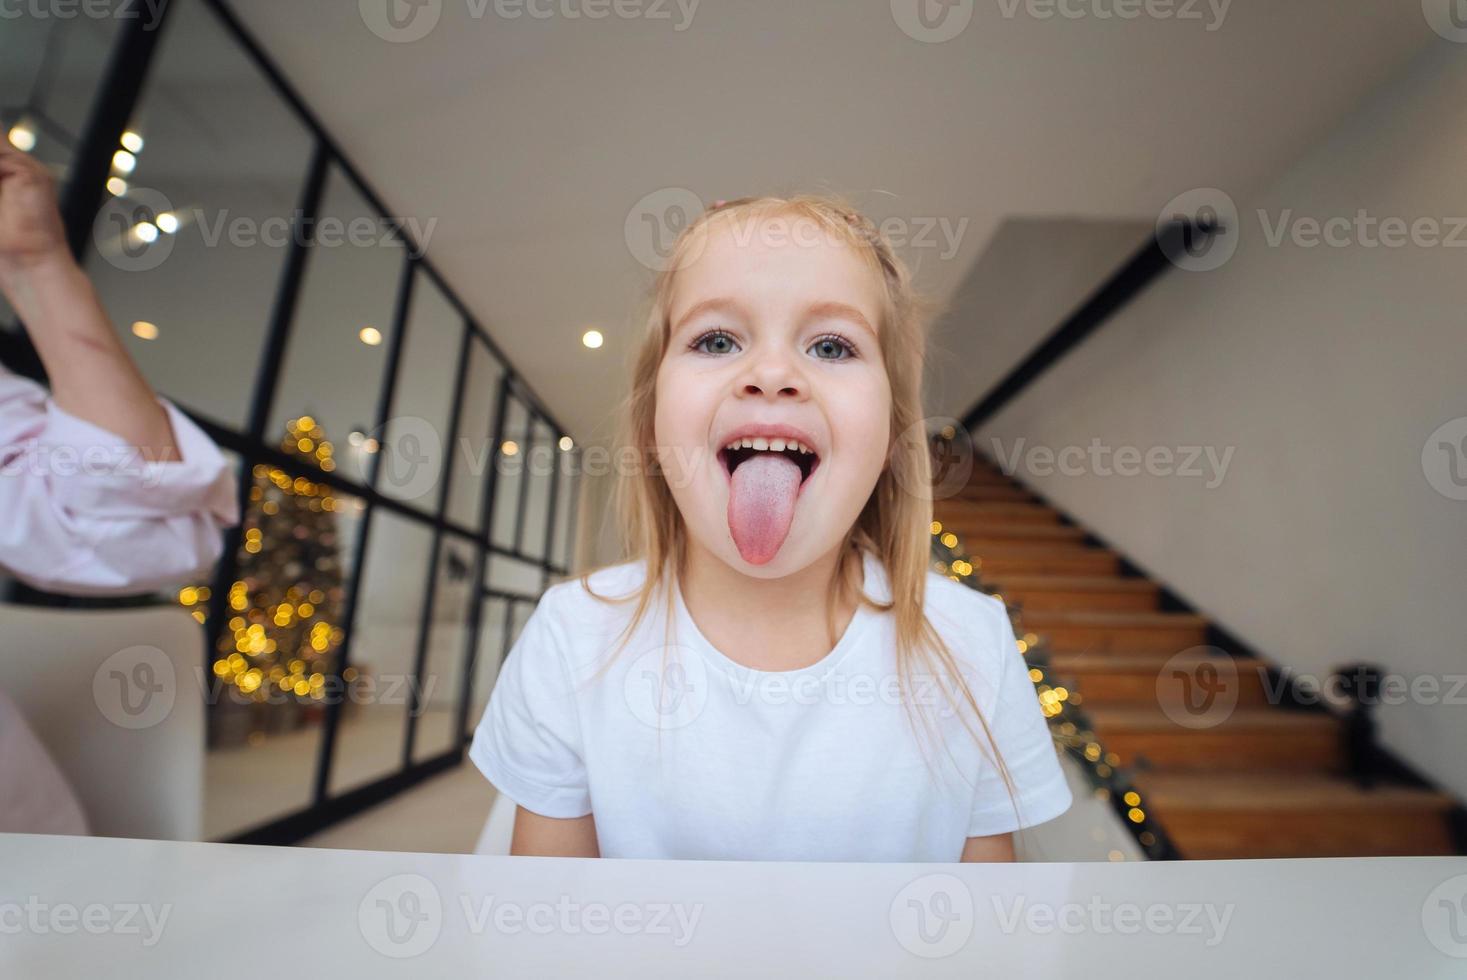 Little girl sticking out tongue at camera close-up photo